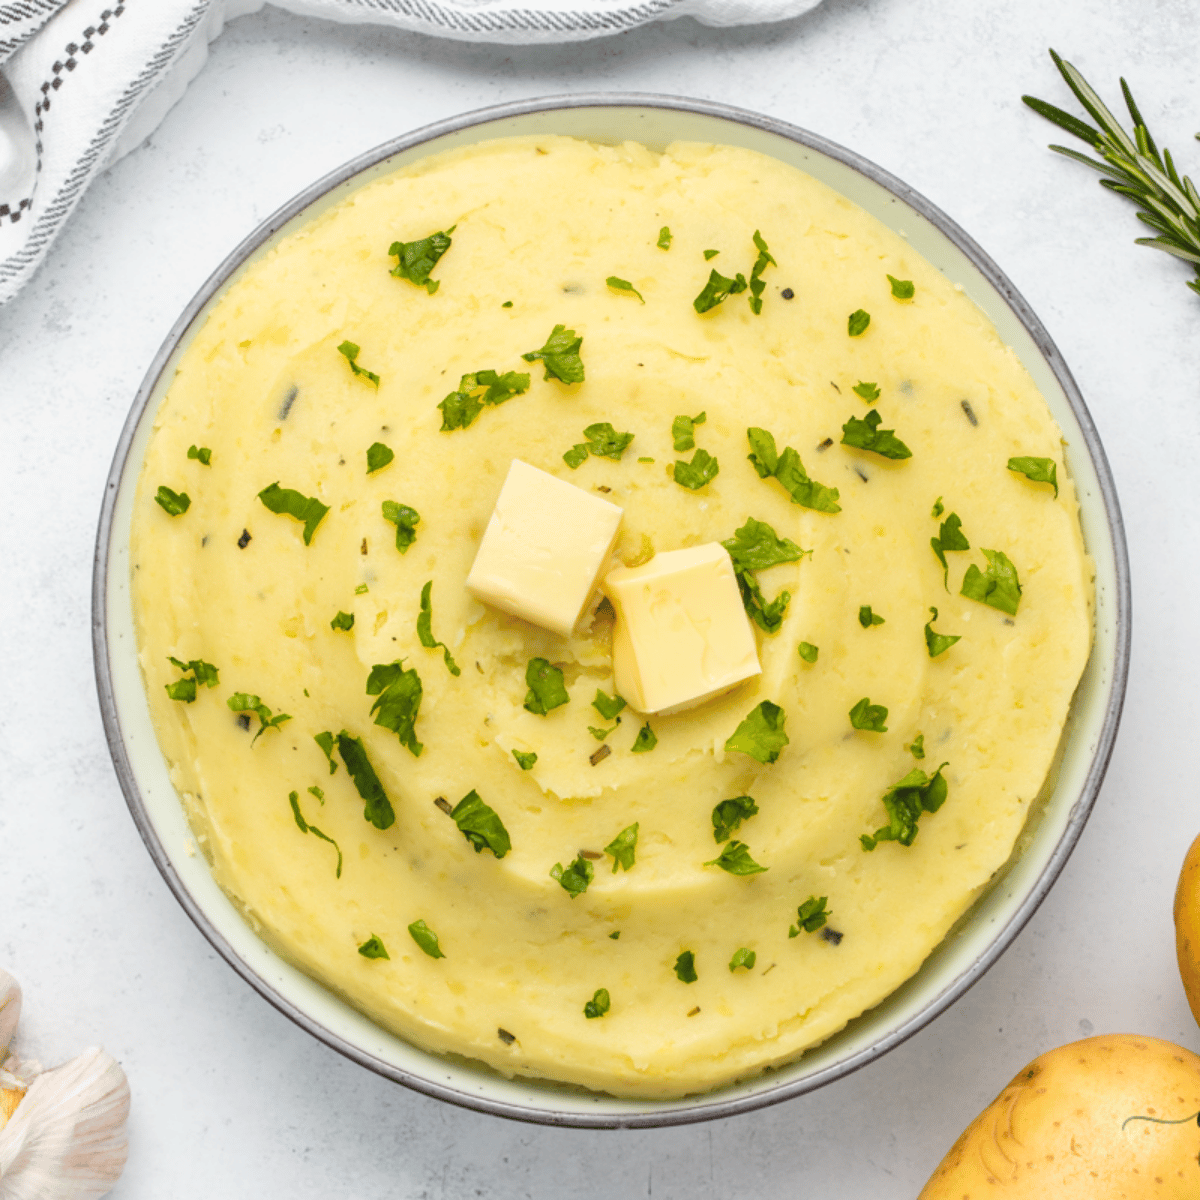 upclose shot of yellow mashed potatoes in a white bowl with two slabs of butter on top and green herbs